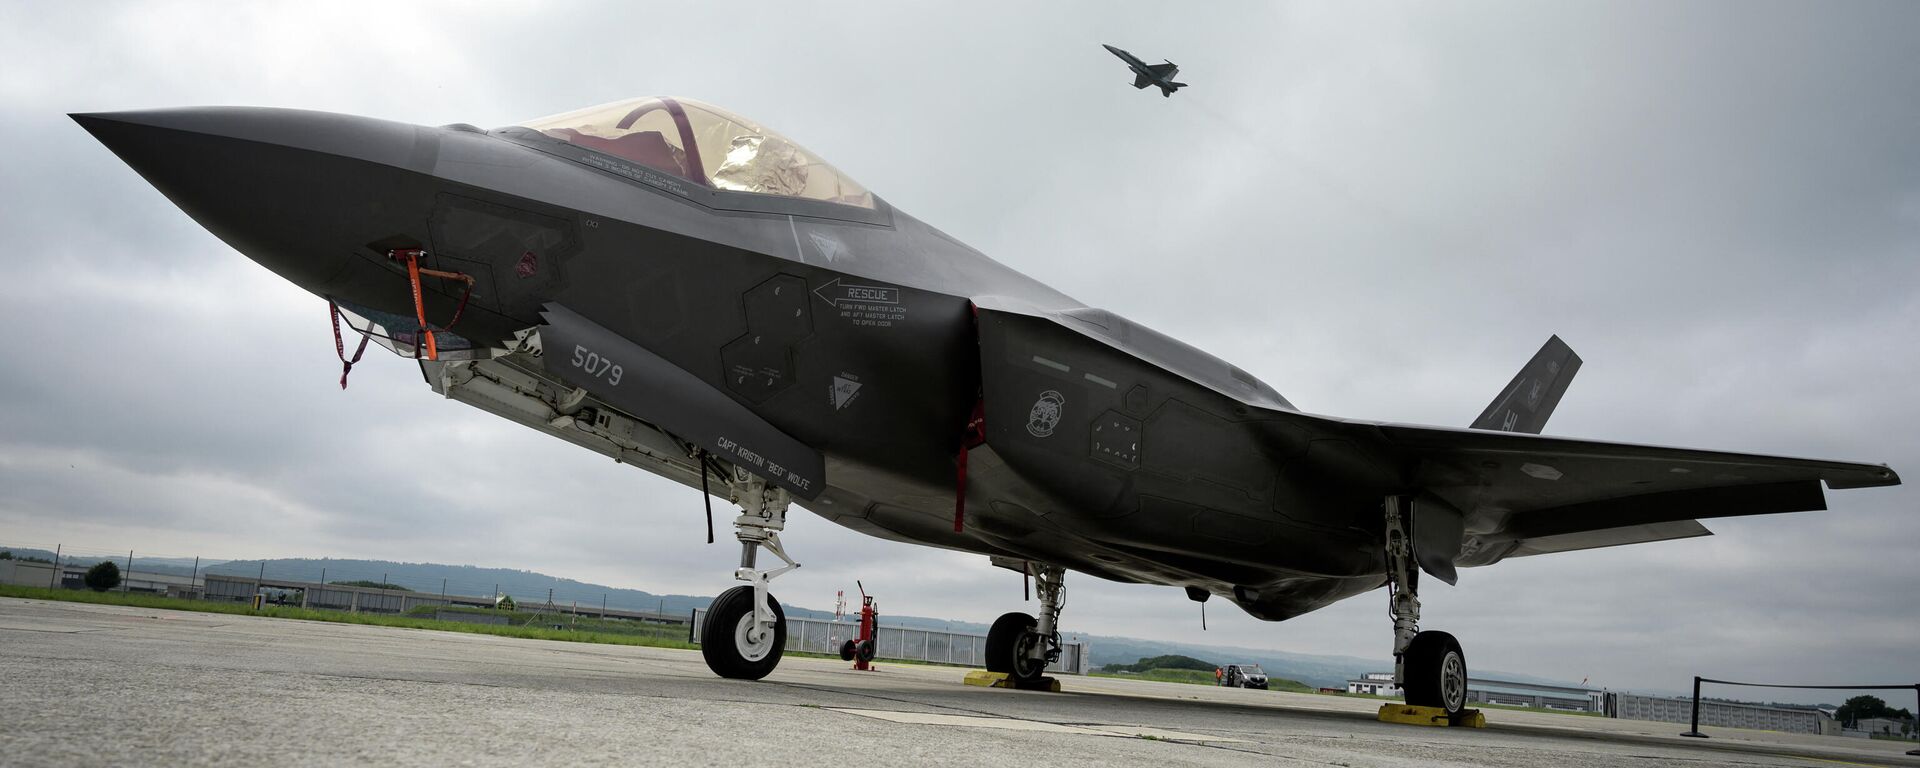 This file photo taken on June 7, 2019 shows a Lockheed Martin F-35 Lightning II fighter jet parked on the tarmac at the Payerne Air Base as a Boeing McDonnell Douglas F/A-18 Hornet takes off in the background, during flight and ground tests. - Sputnik International, 1920, 14.03.2022